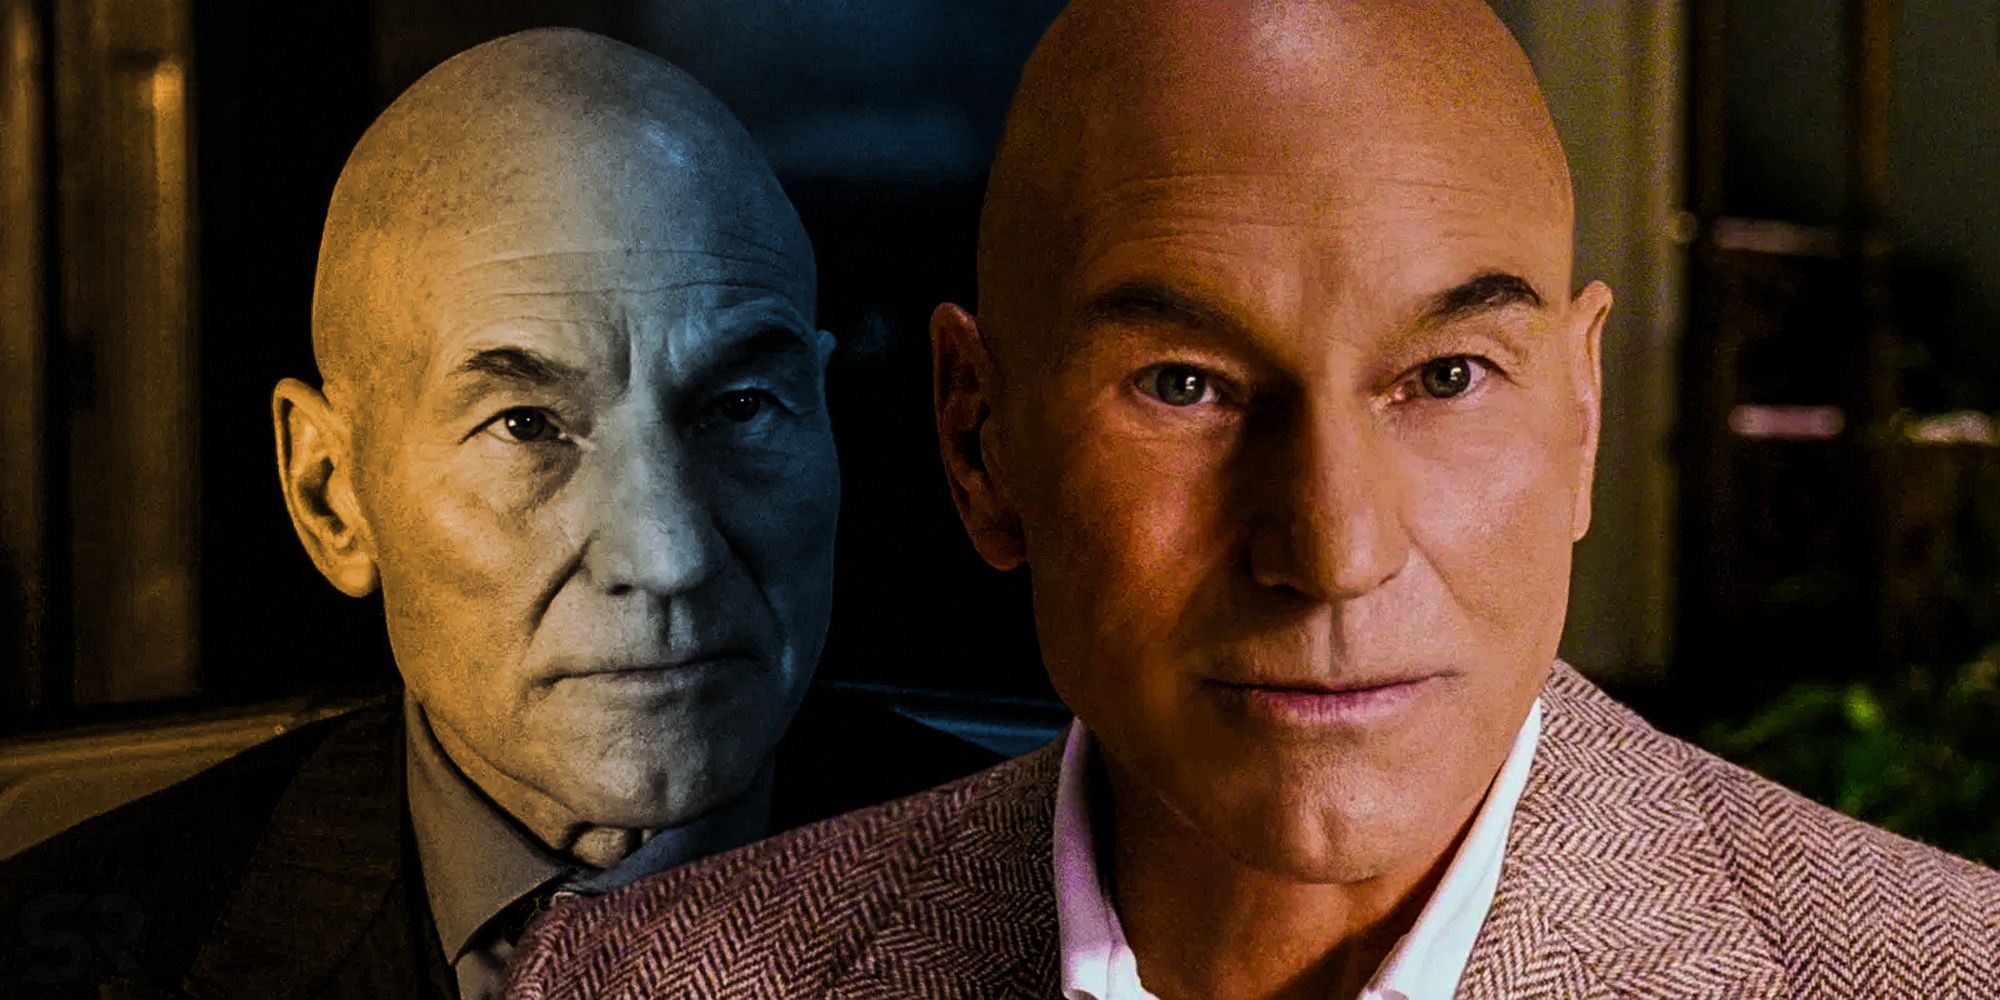 How X Men The Last Stand De Aged Patrick Stewart Why It S So Bad